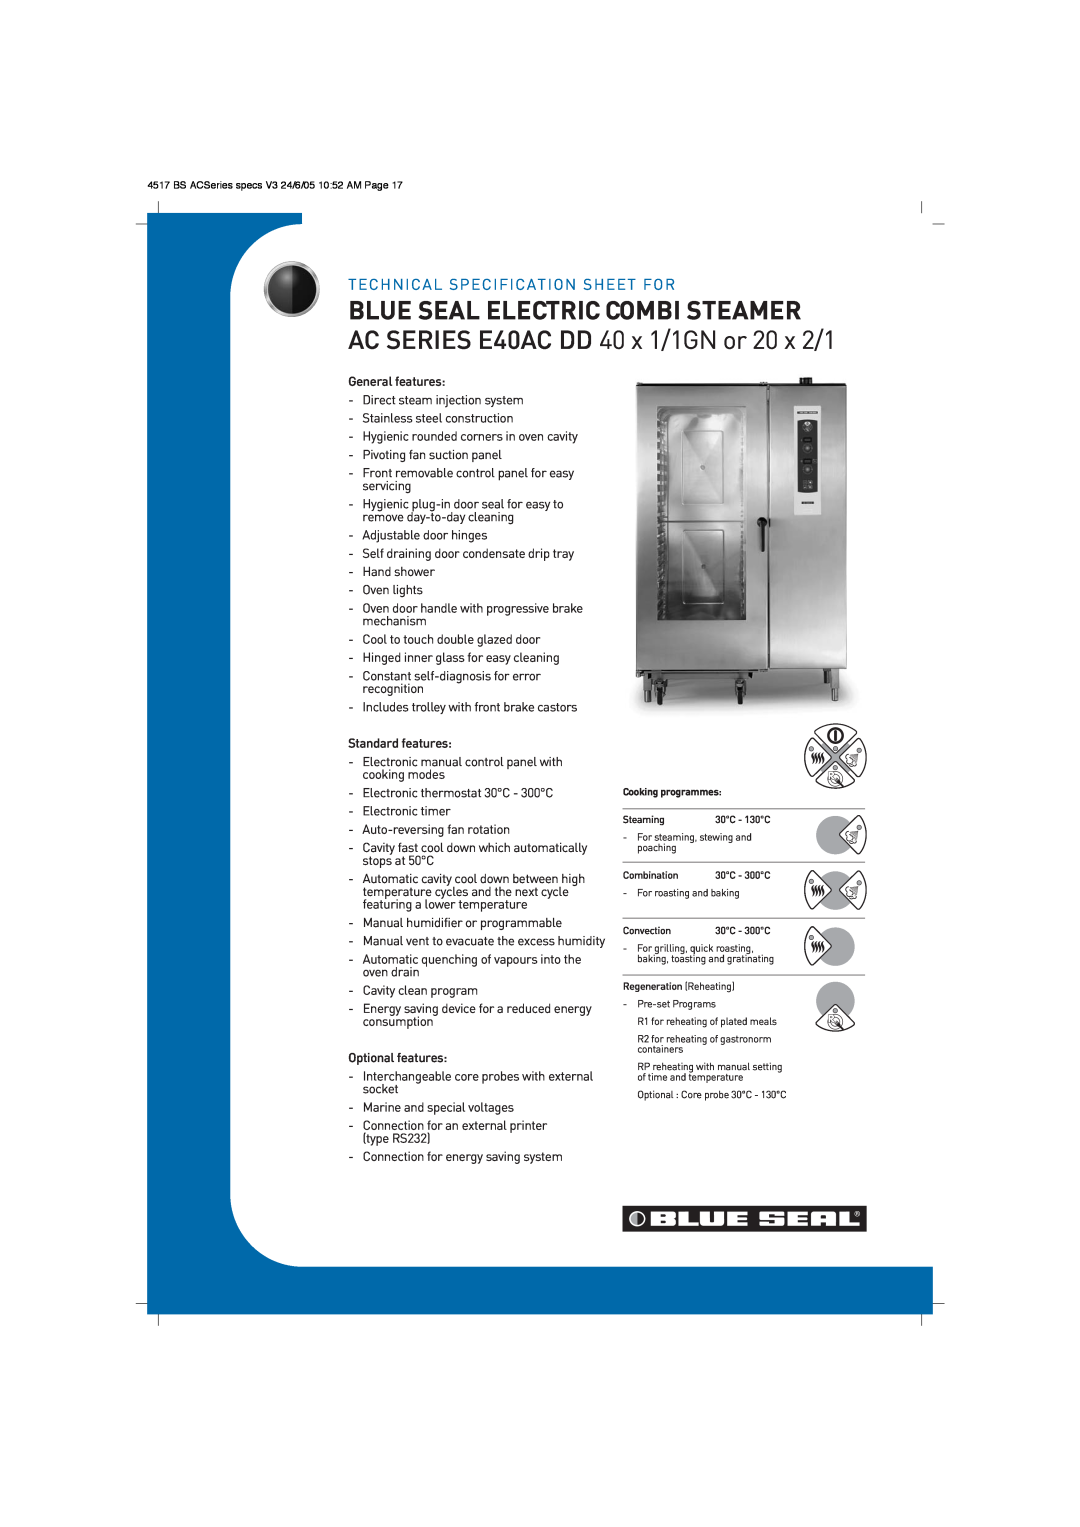 Moffat technical specifications Blue Seal Electric Combi Steamer, AC SERIES E40AC DD 40 x 1/1GN or 20 x 2/1 